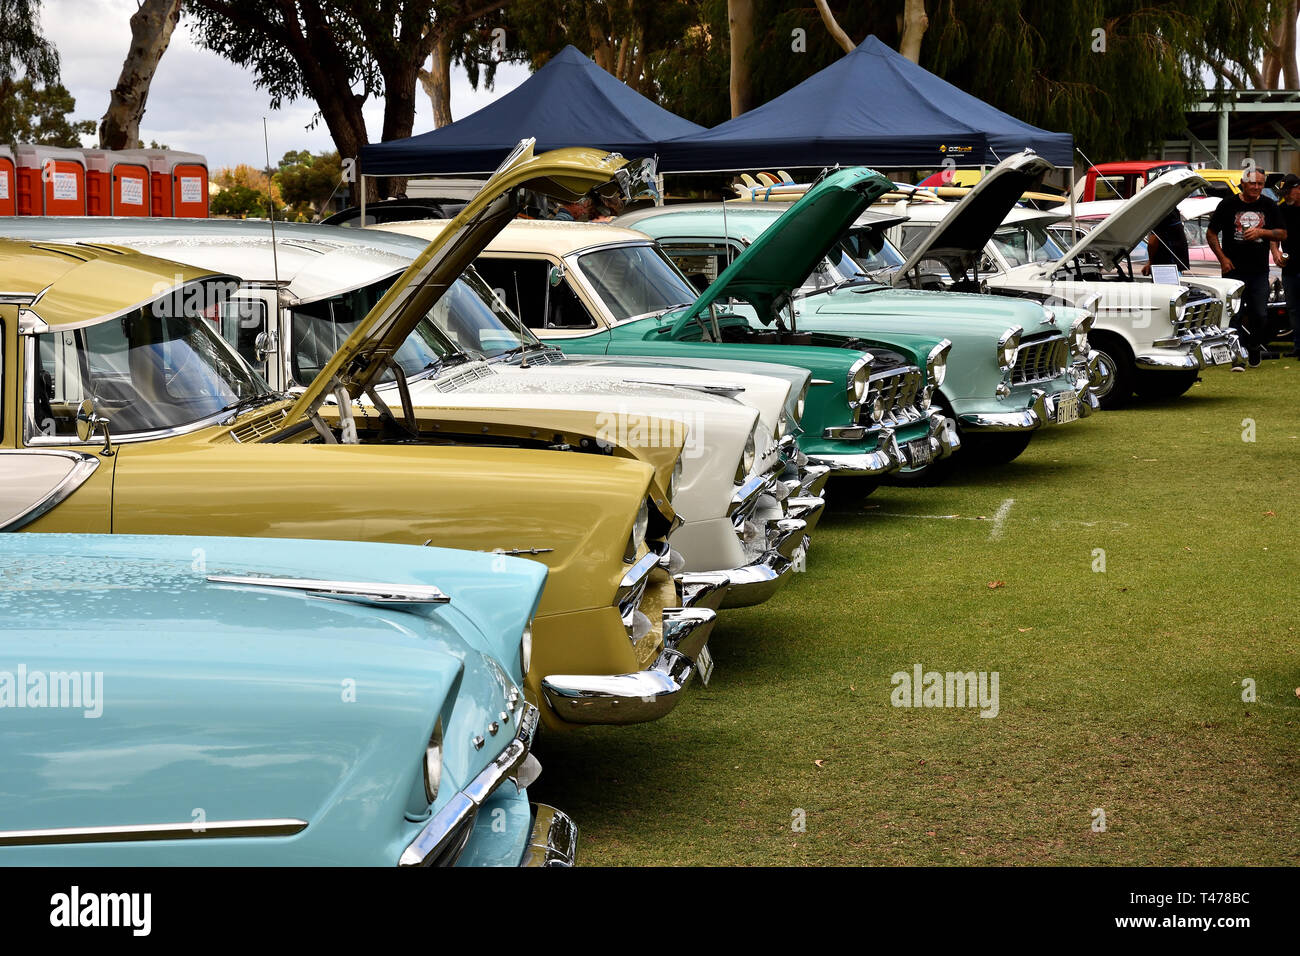 Classic Holden cars on display at a classic car show Stock Photo